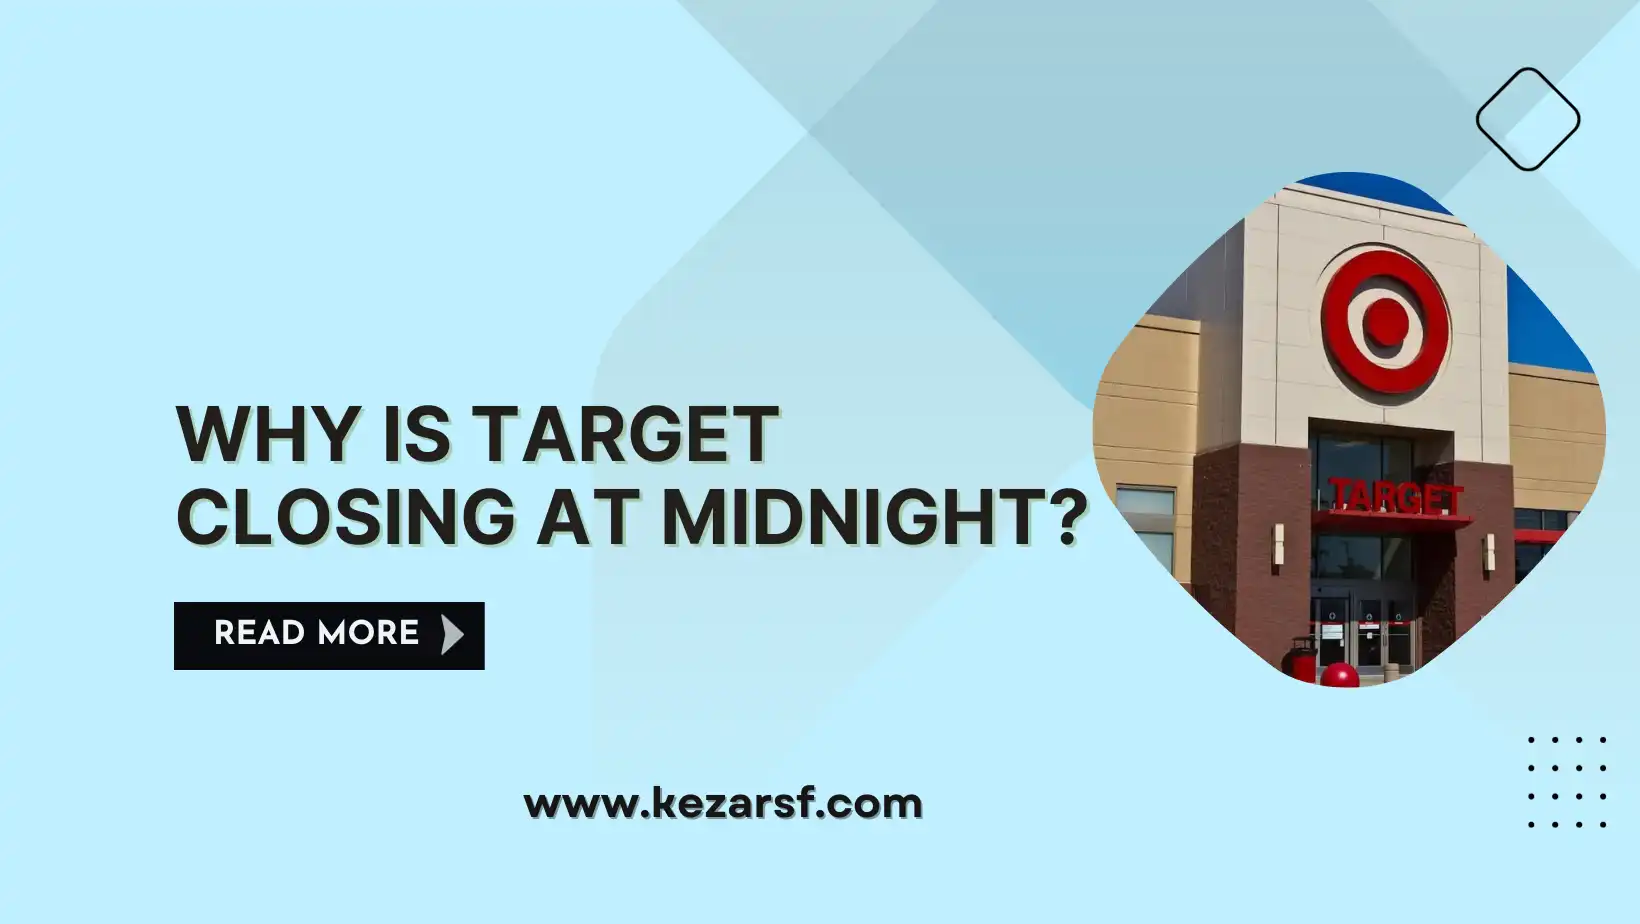 Why is Target Closing at Midnight?